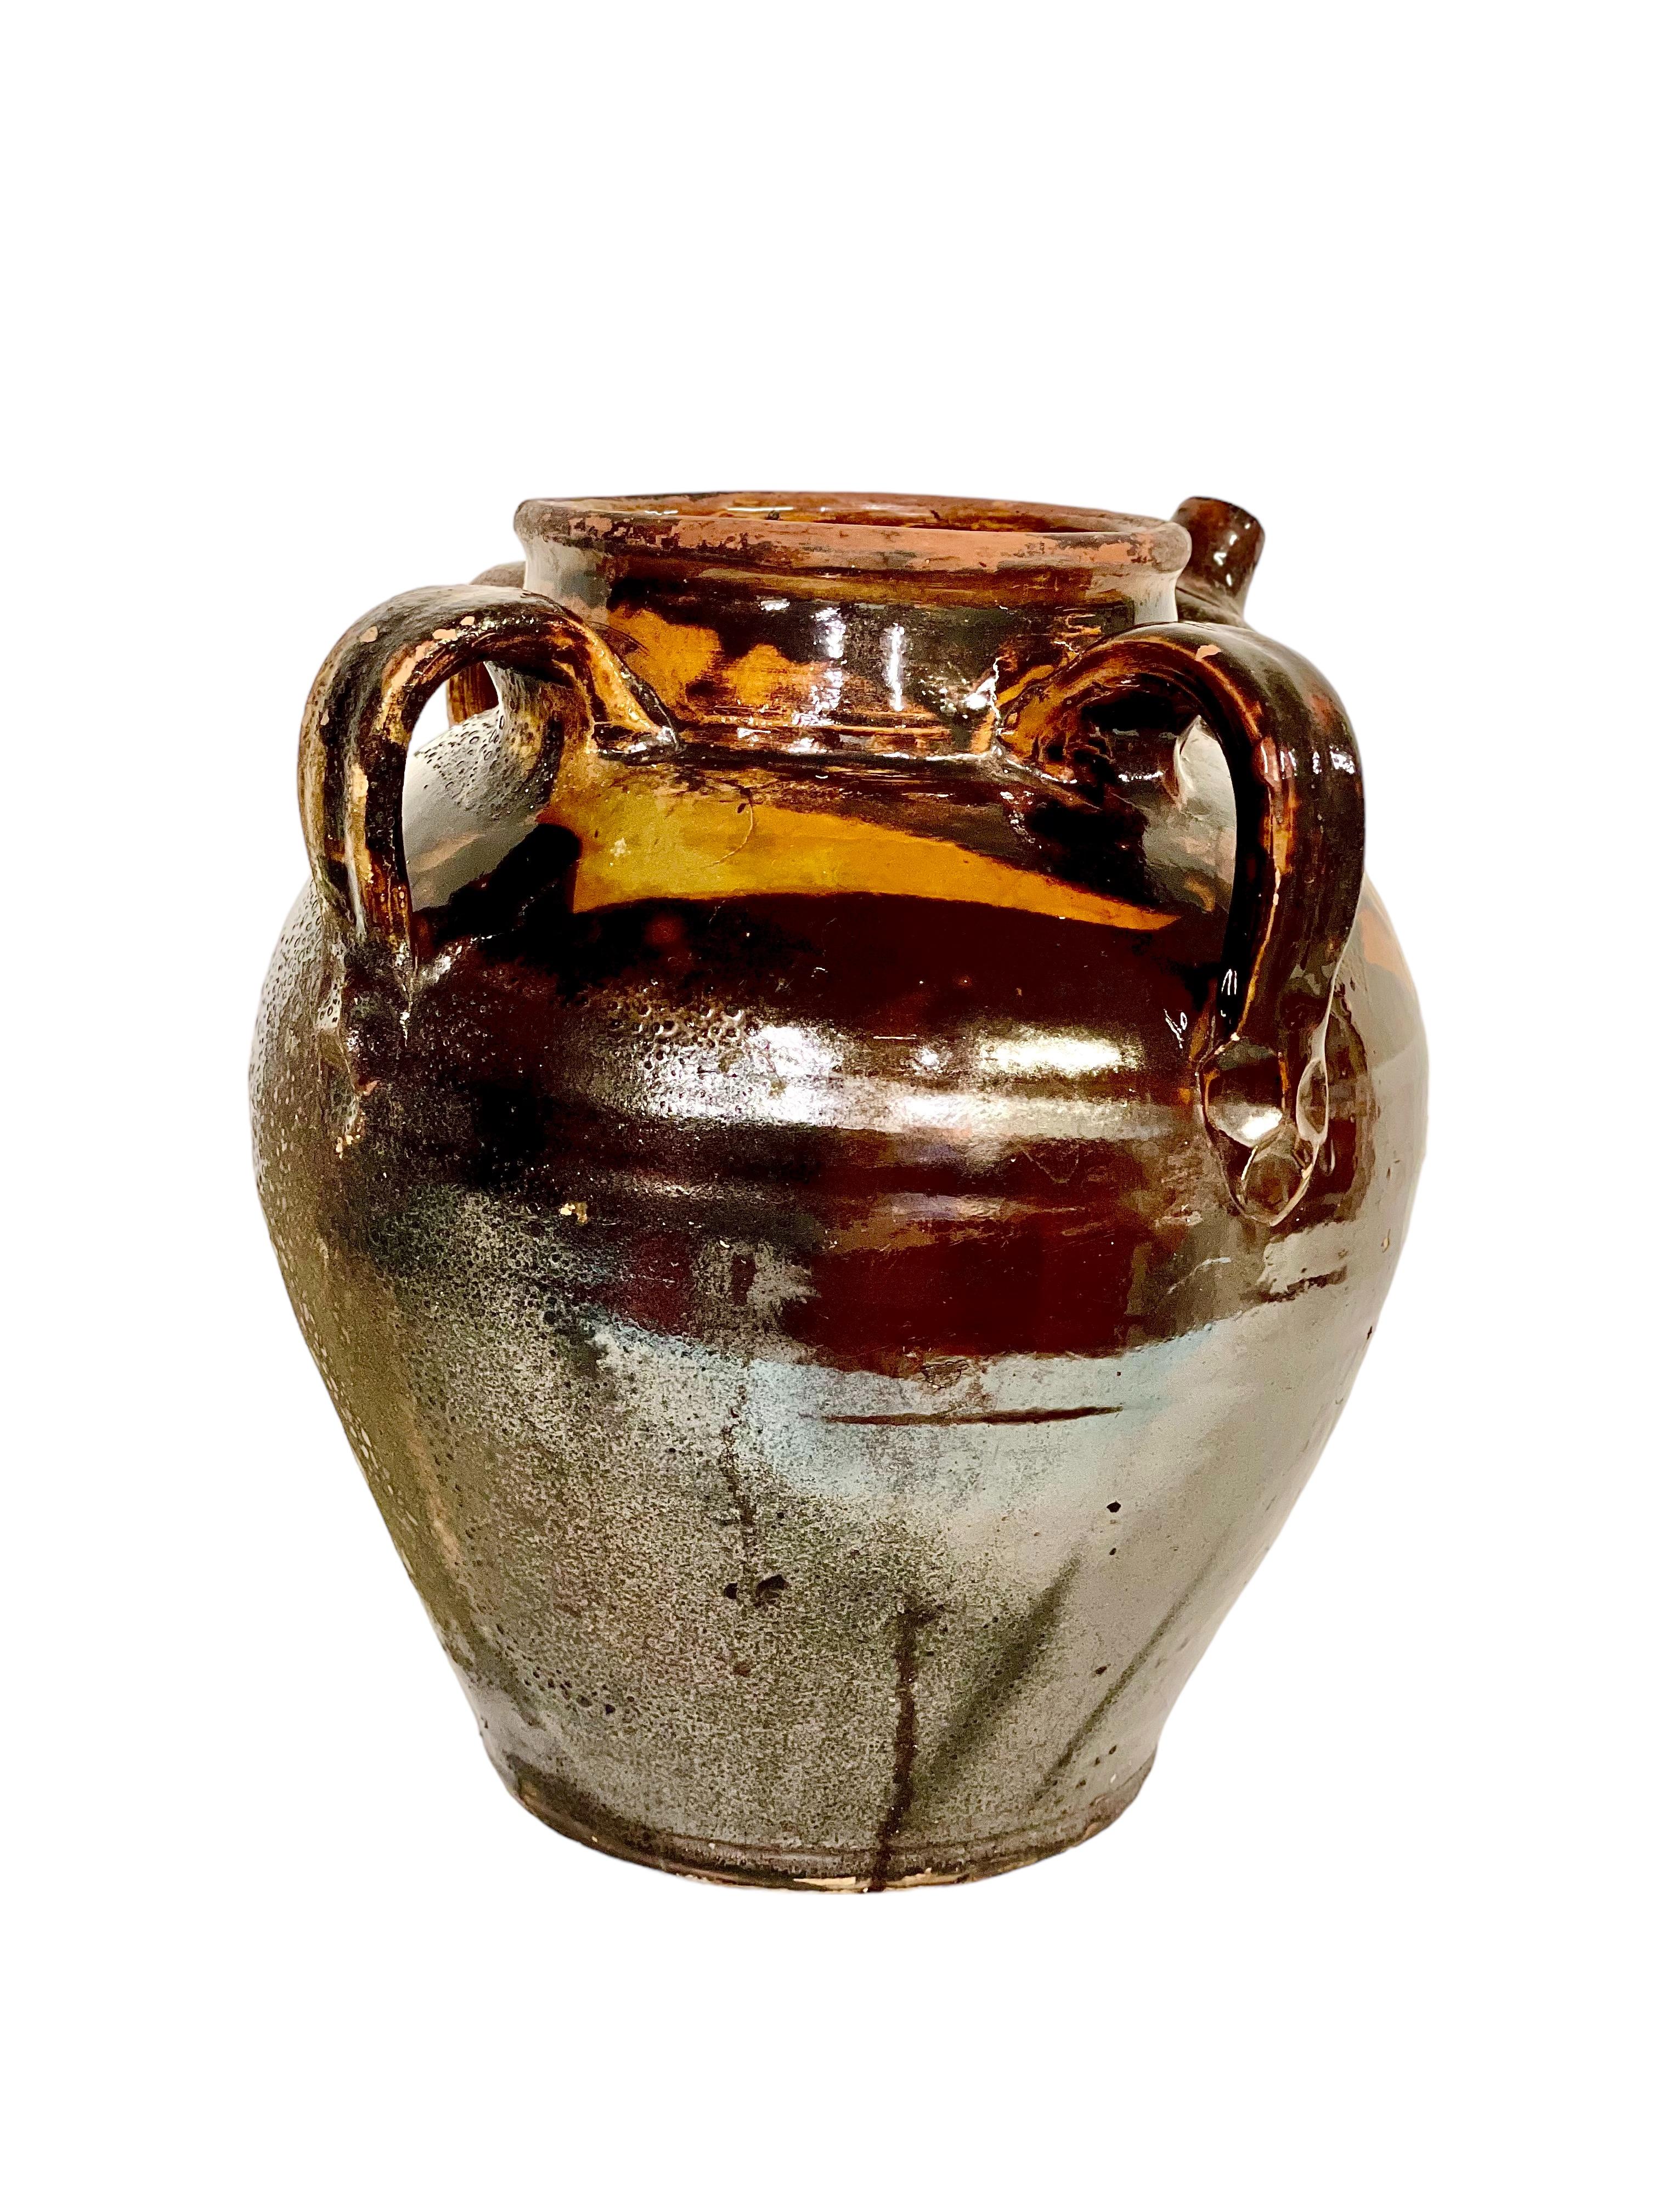 Earthenware 19th C. Brown and Yellow Glazed Oil Jar For Sale